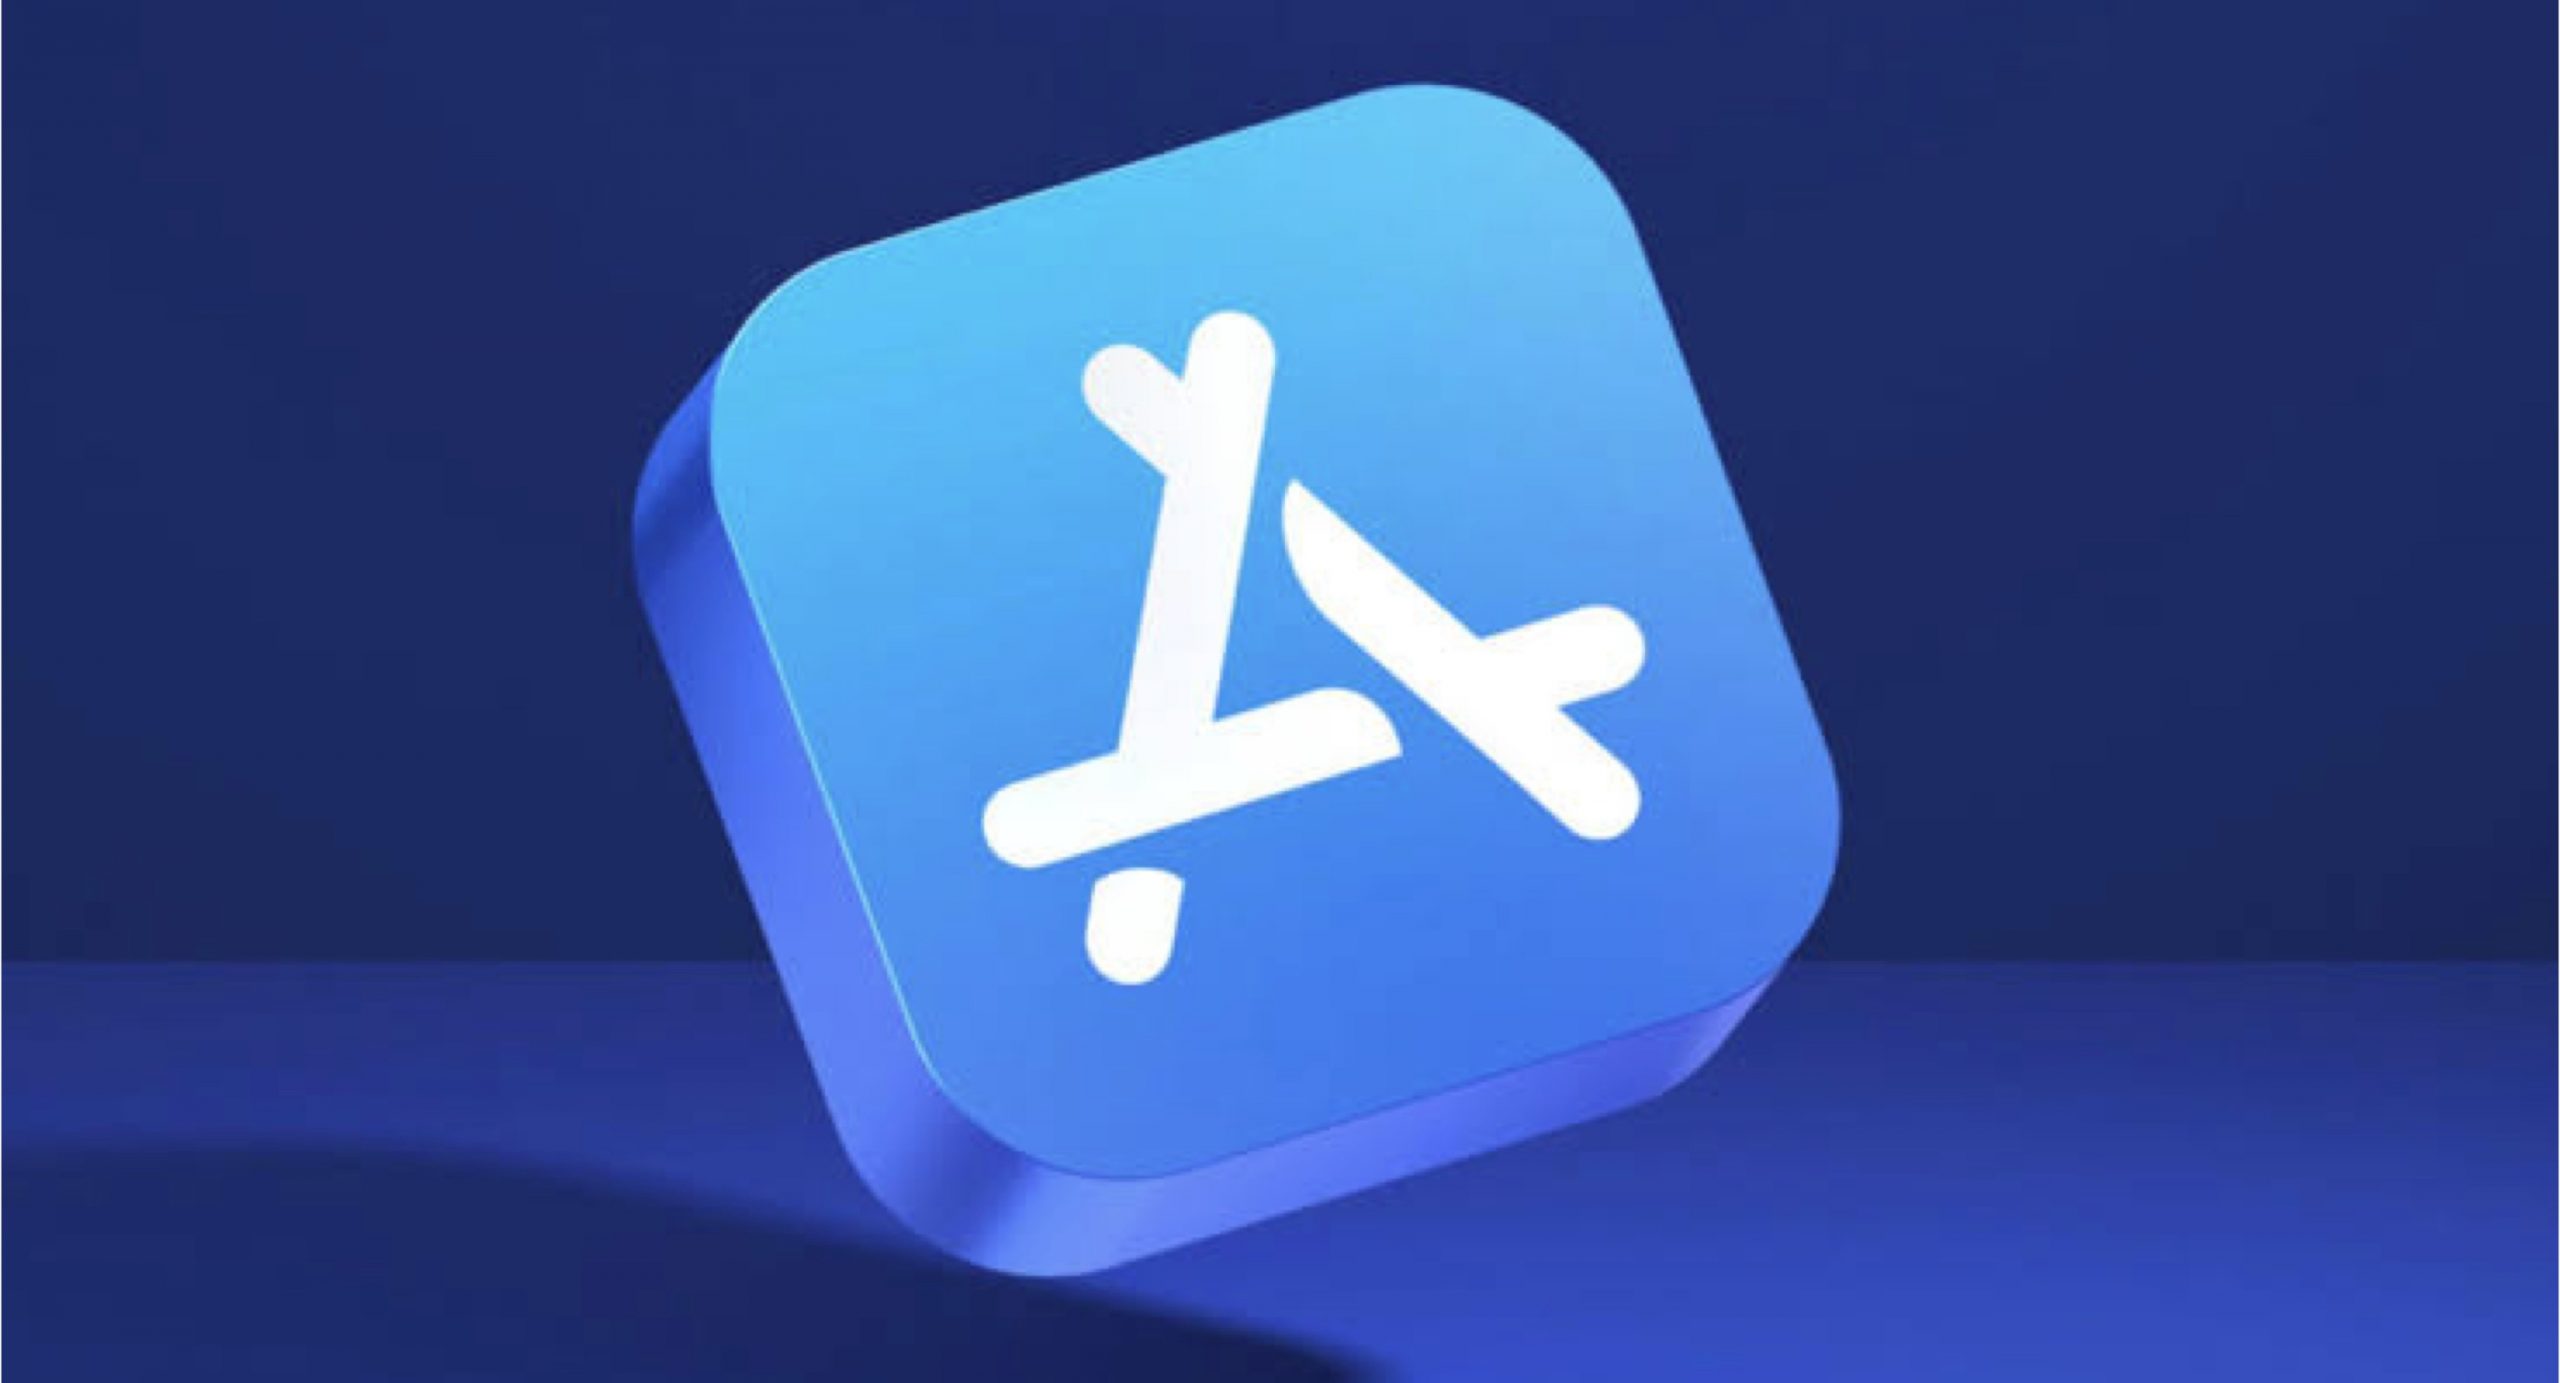 10 of the Top-Ranking AppStore Applications of All-Time